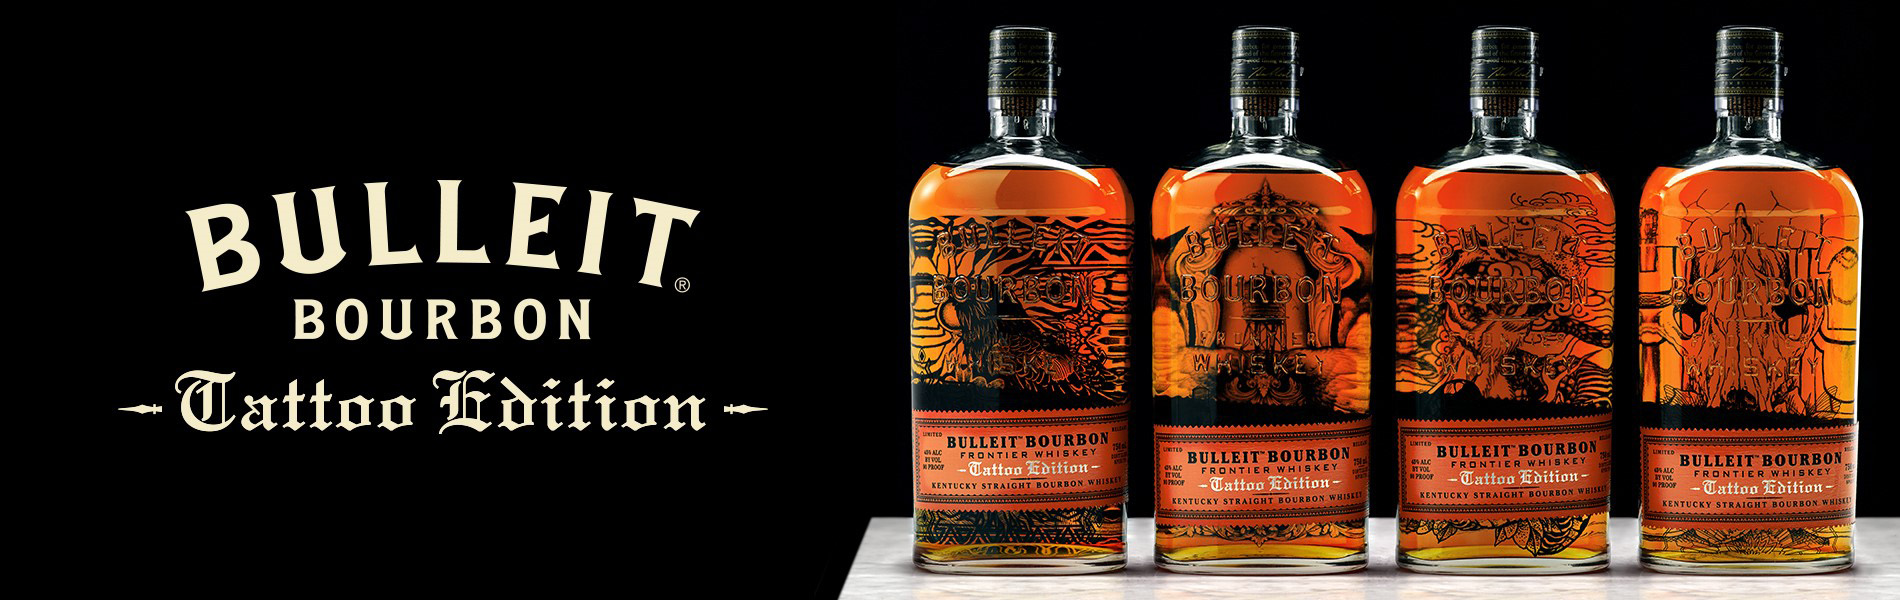 Bulleit Bourbon Gets Inked By Nation's Top Tattoo Artists For Launch Of  Limited